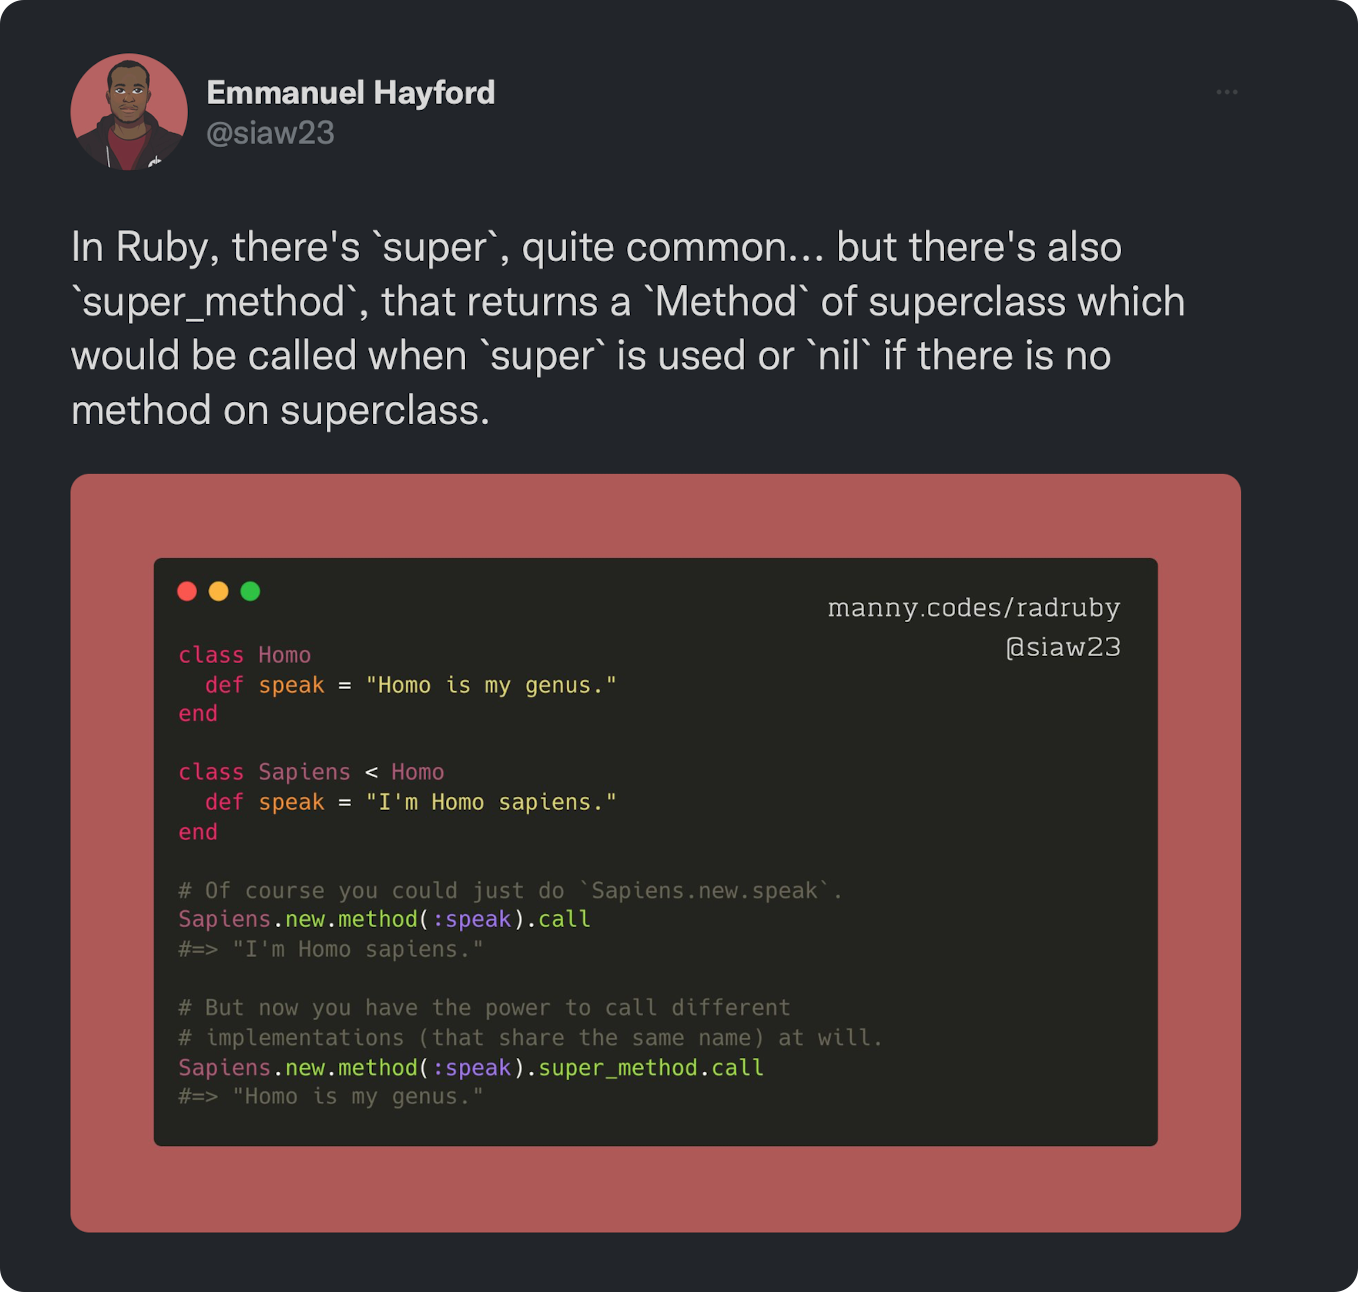 In Ruby, there's `super`, quite common... but there's also `super_method`, that returns a `Method` of superclass which would be called when `super` is used or `nil` if there is no method on superclass.